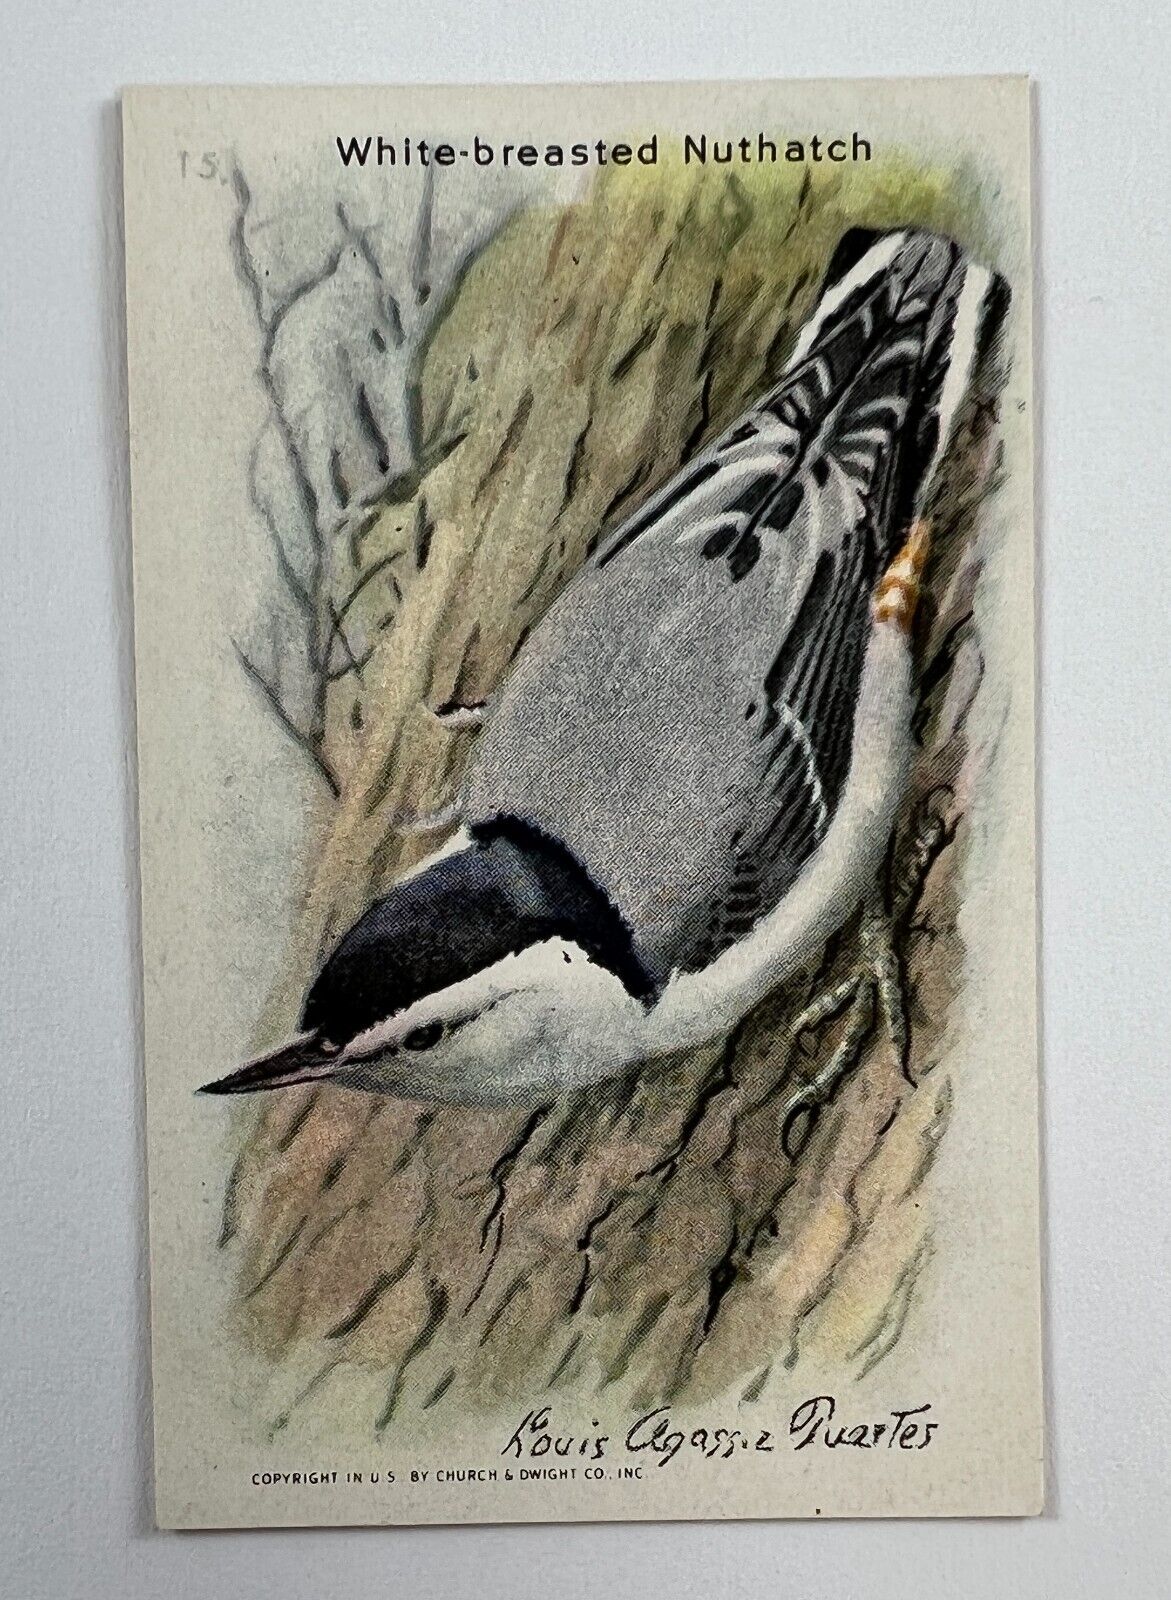 1936 Church & Dwight J96 Useful Birds of America 15 White Breasted Nuthatch NSB4